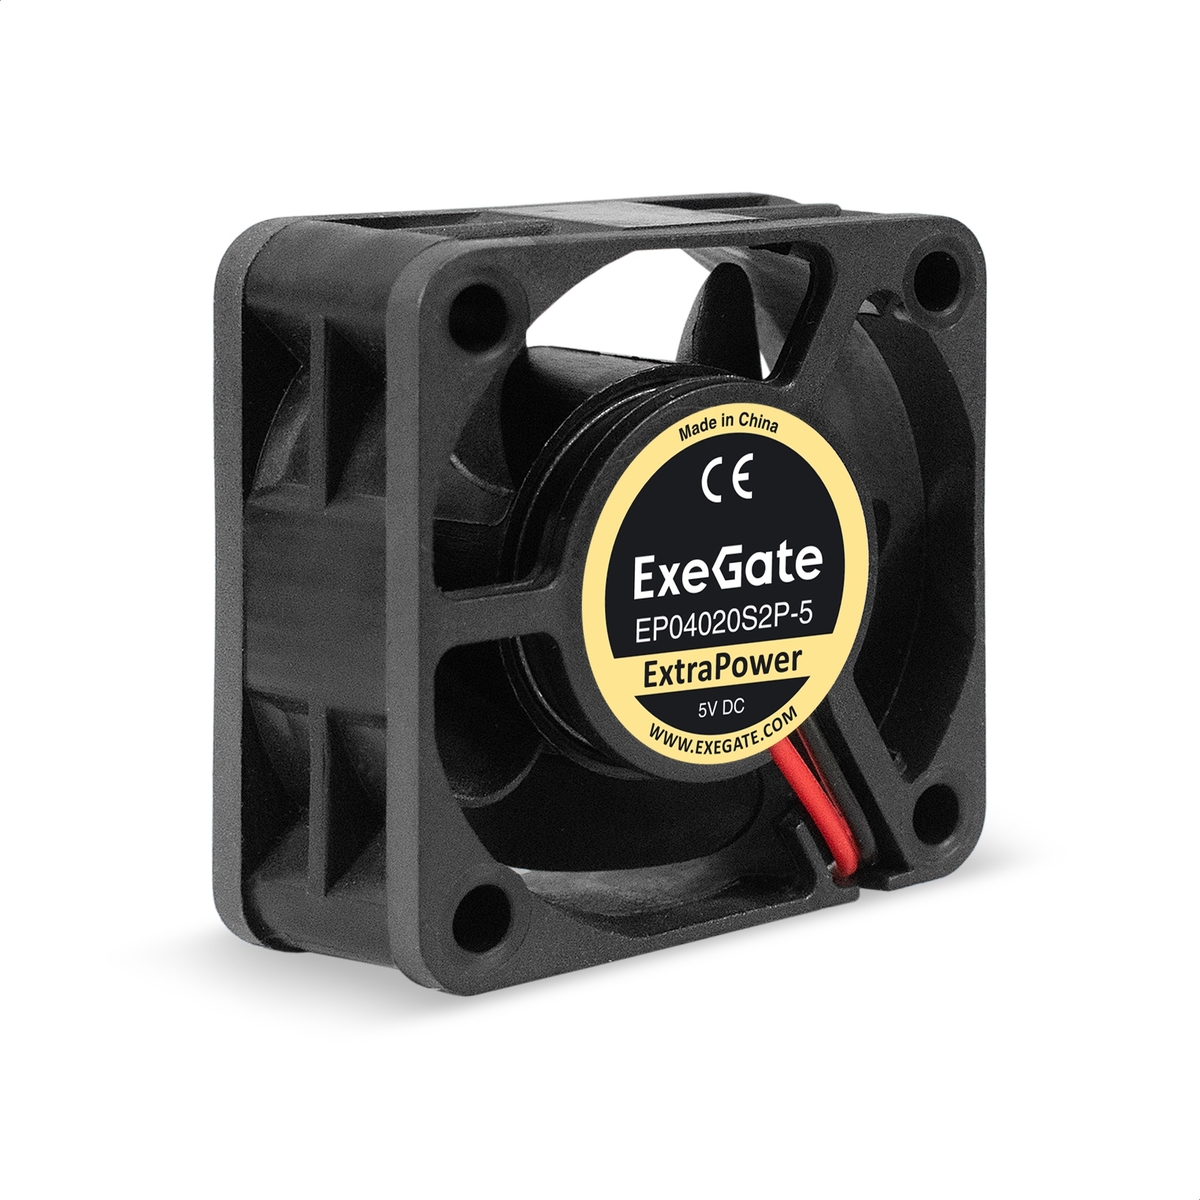  5 DC ExeGate ExtraPower EP04020S2P-5